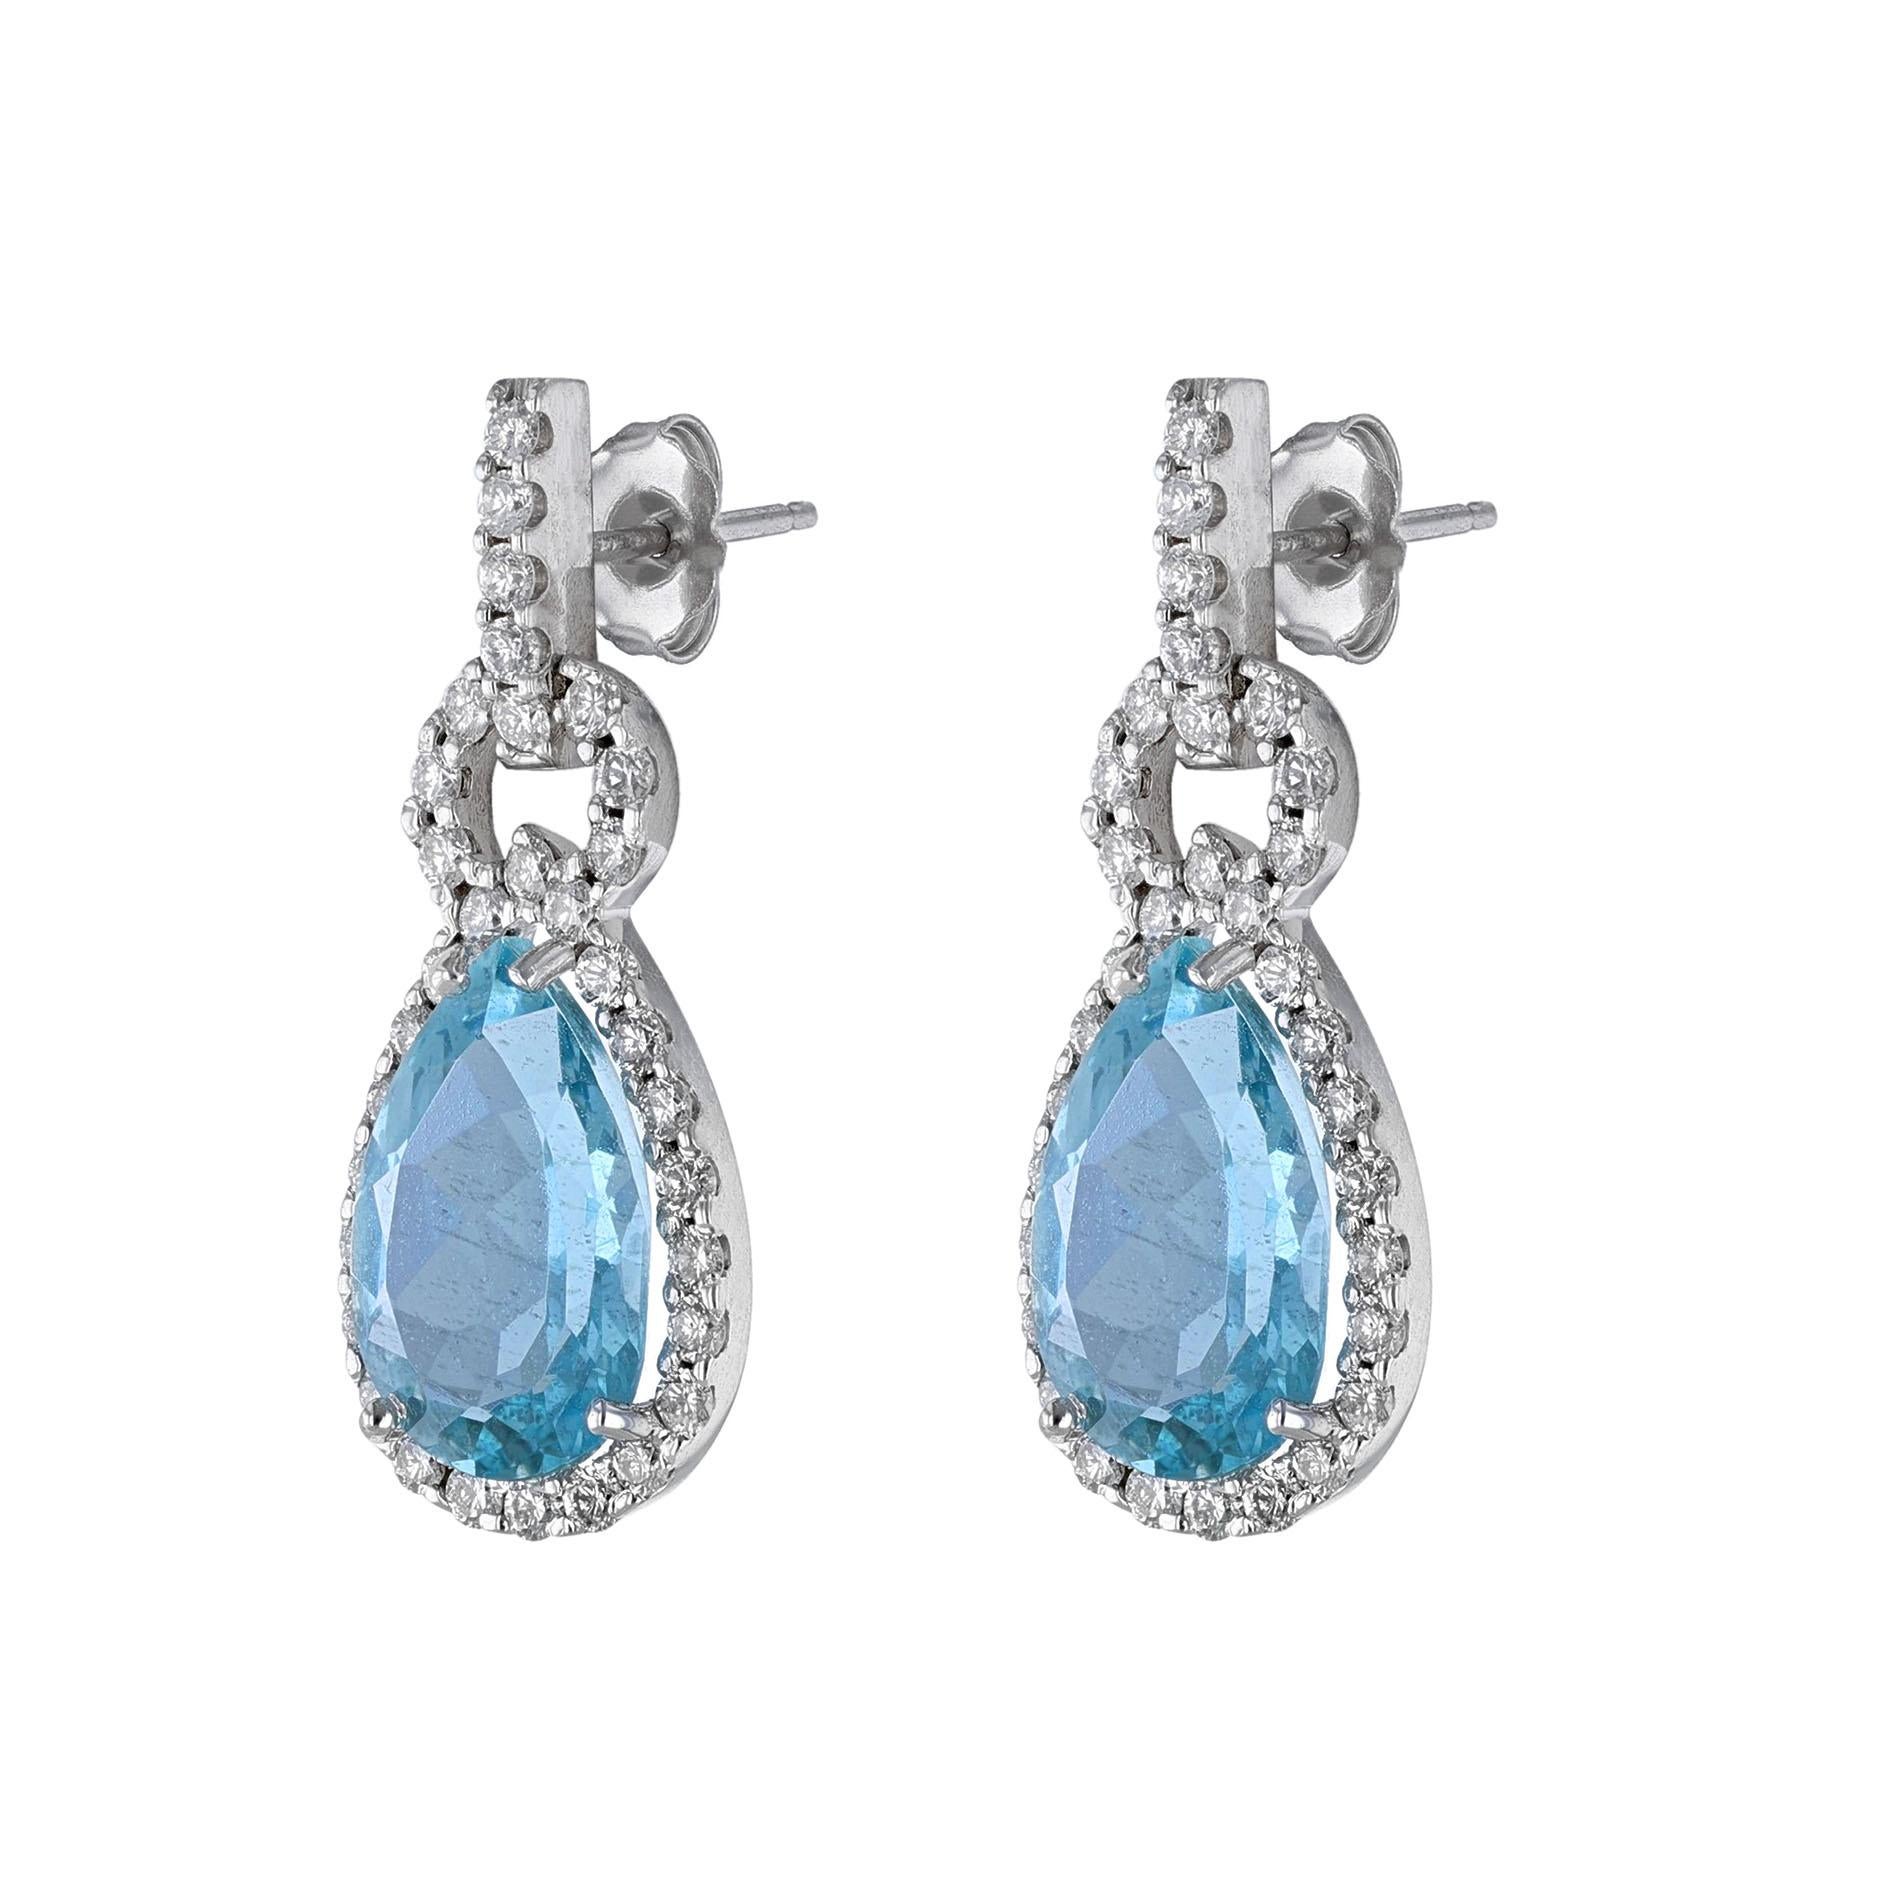 These earrings are made of 14k white gold and features 2 Pear Shape Aquamarine weighing a combined total weight of 9.46 carats. On a mounting of 60 round cut diamonds weighing 1.72cts. All stones are prong set. Earrings have a post backing.